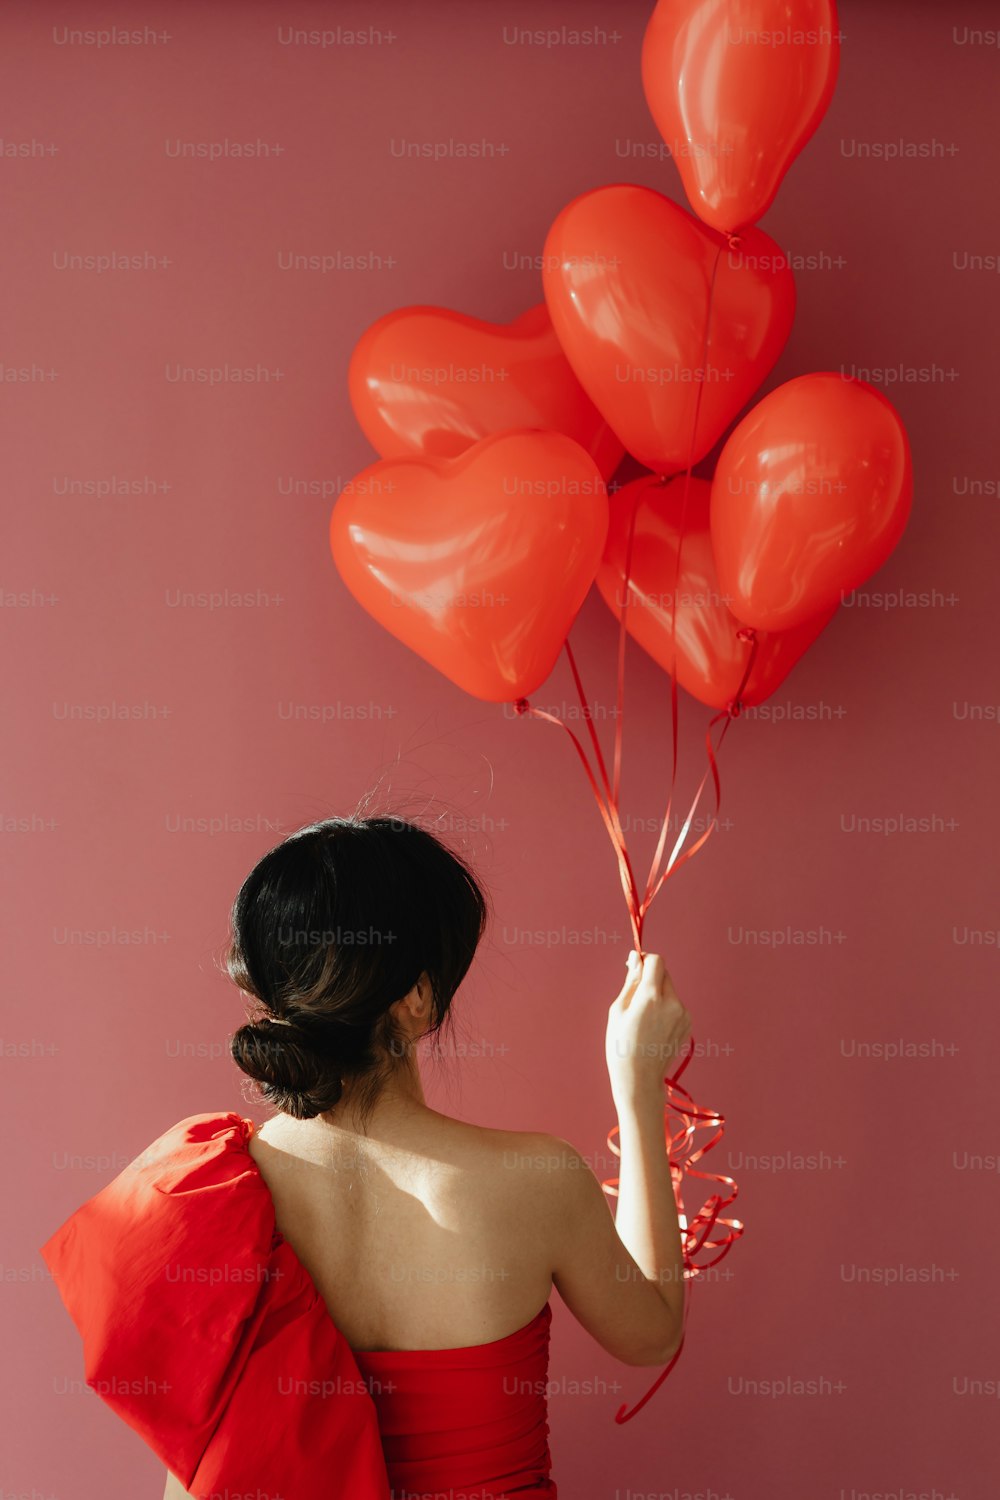 a woman in a red dress holding a bunch of red heart shaped balloons